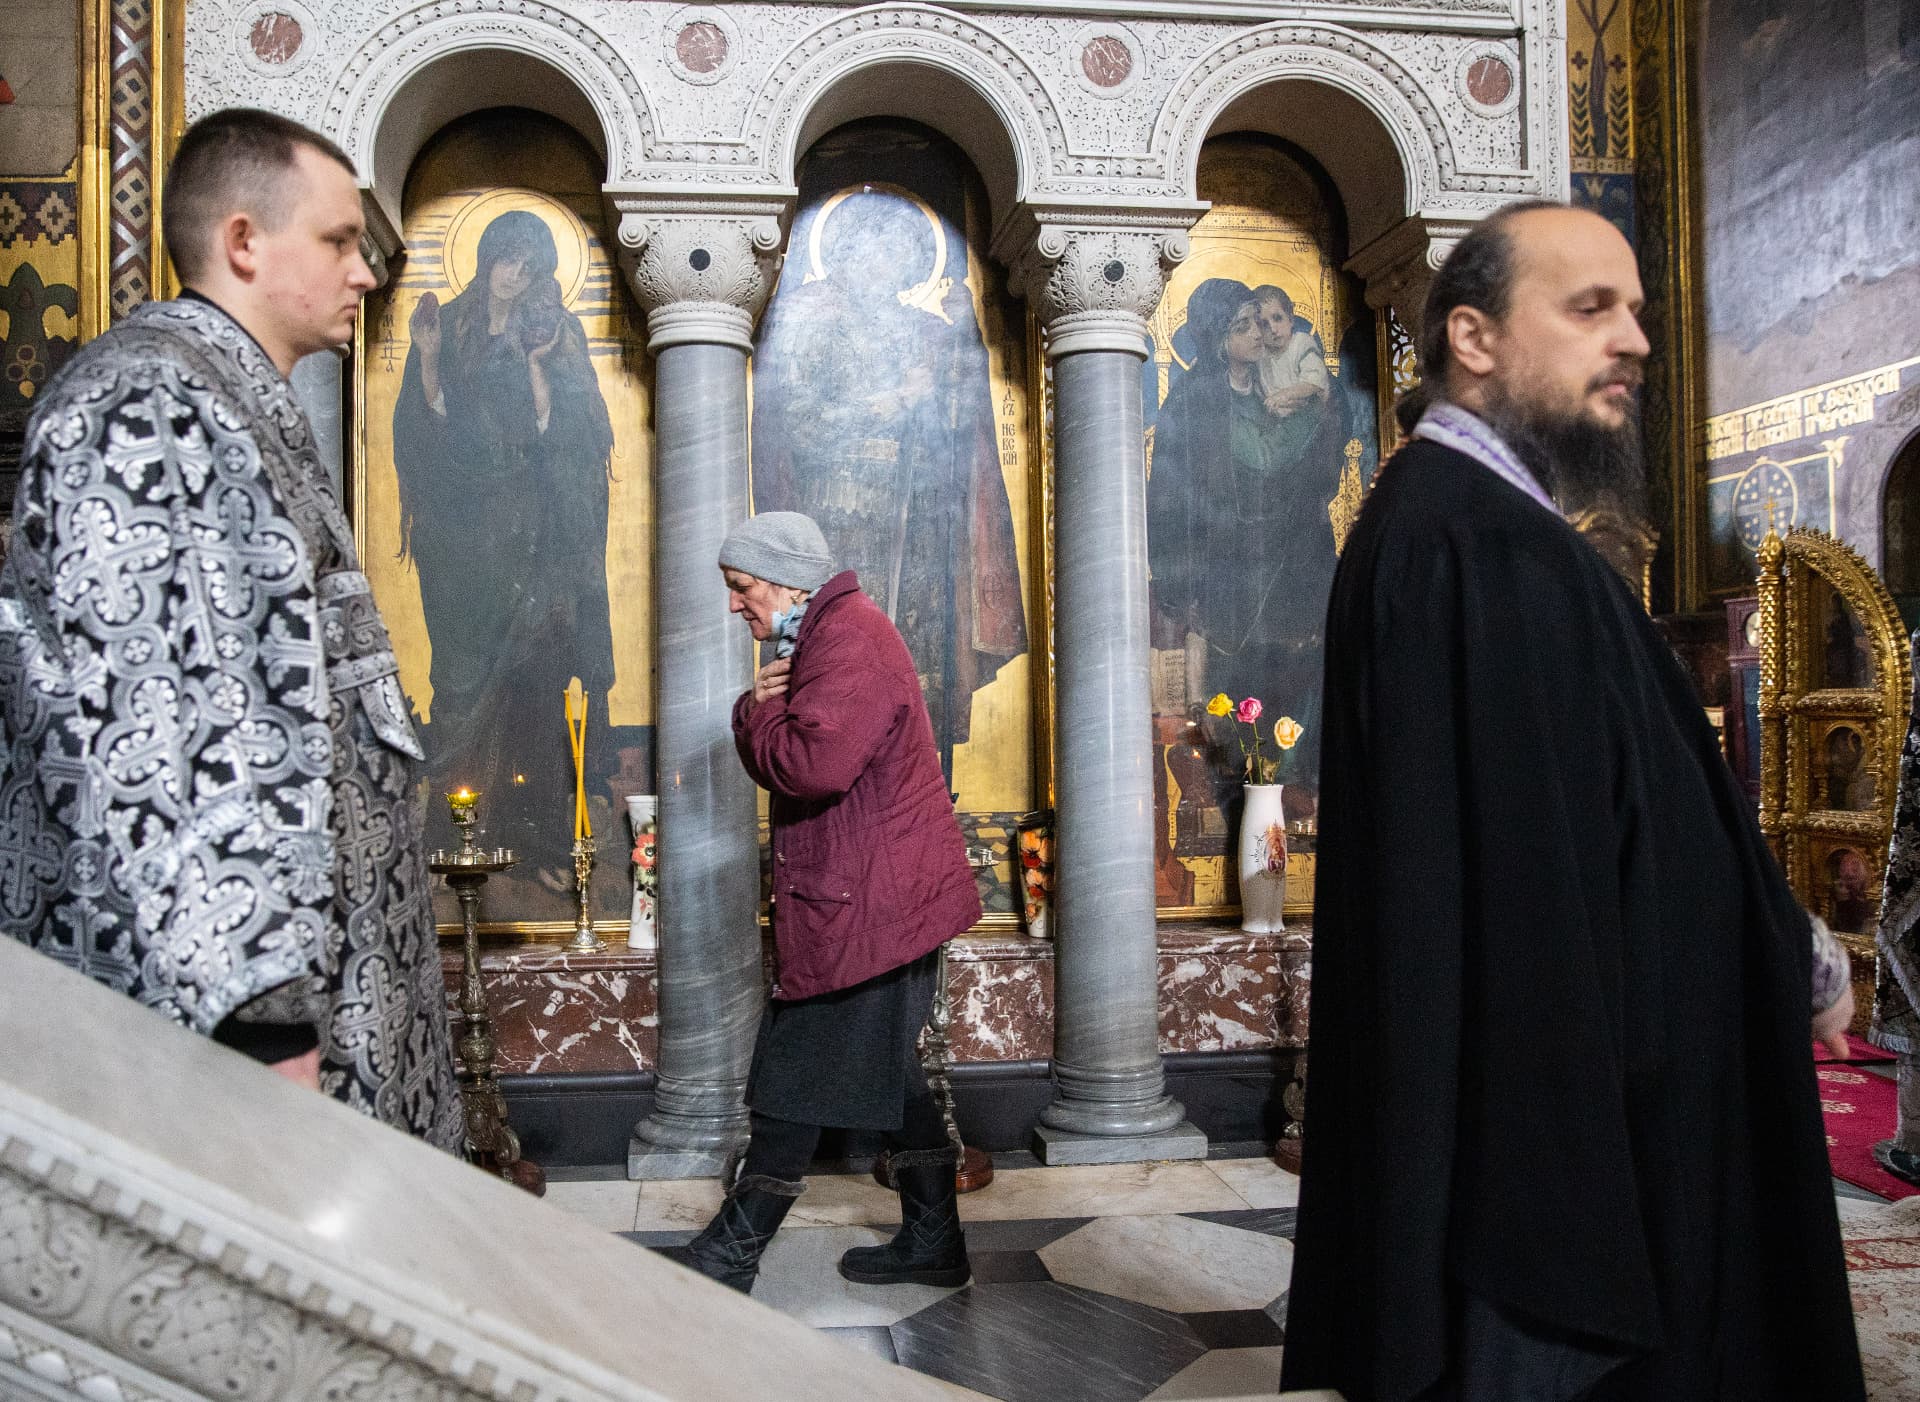 Divine service in the Vladimir Cathedral Patriarchal Cathedral, in Kyiv